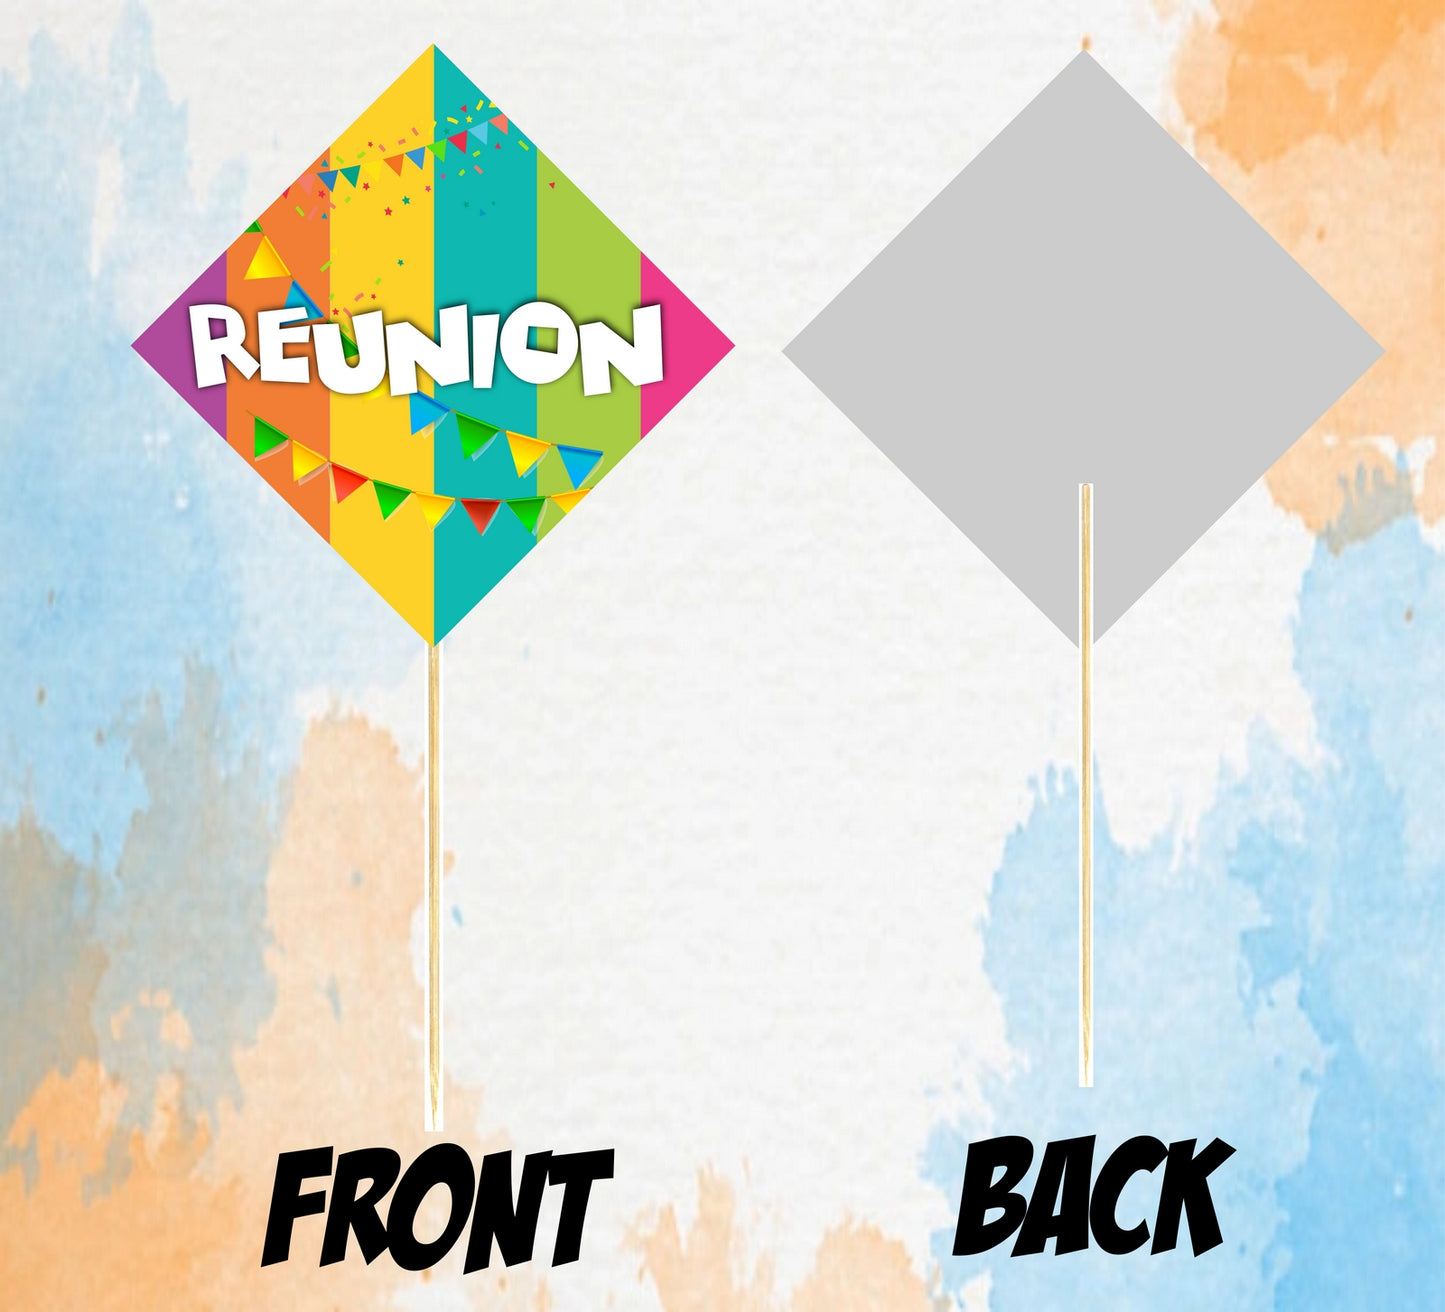 Reunion Photo Booth Party Props College School Reunion Theme Party Decoration Photo Booth Party Item for Adults and Kids (Pack of 10)…